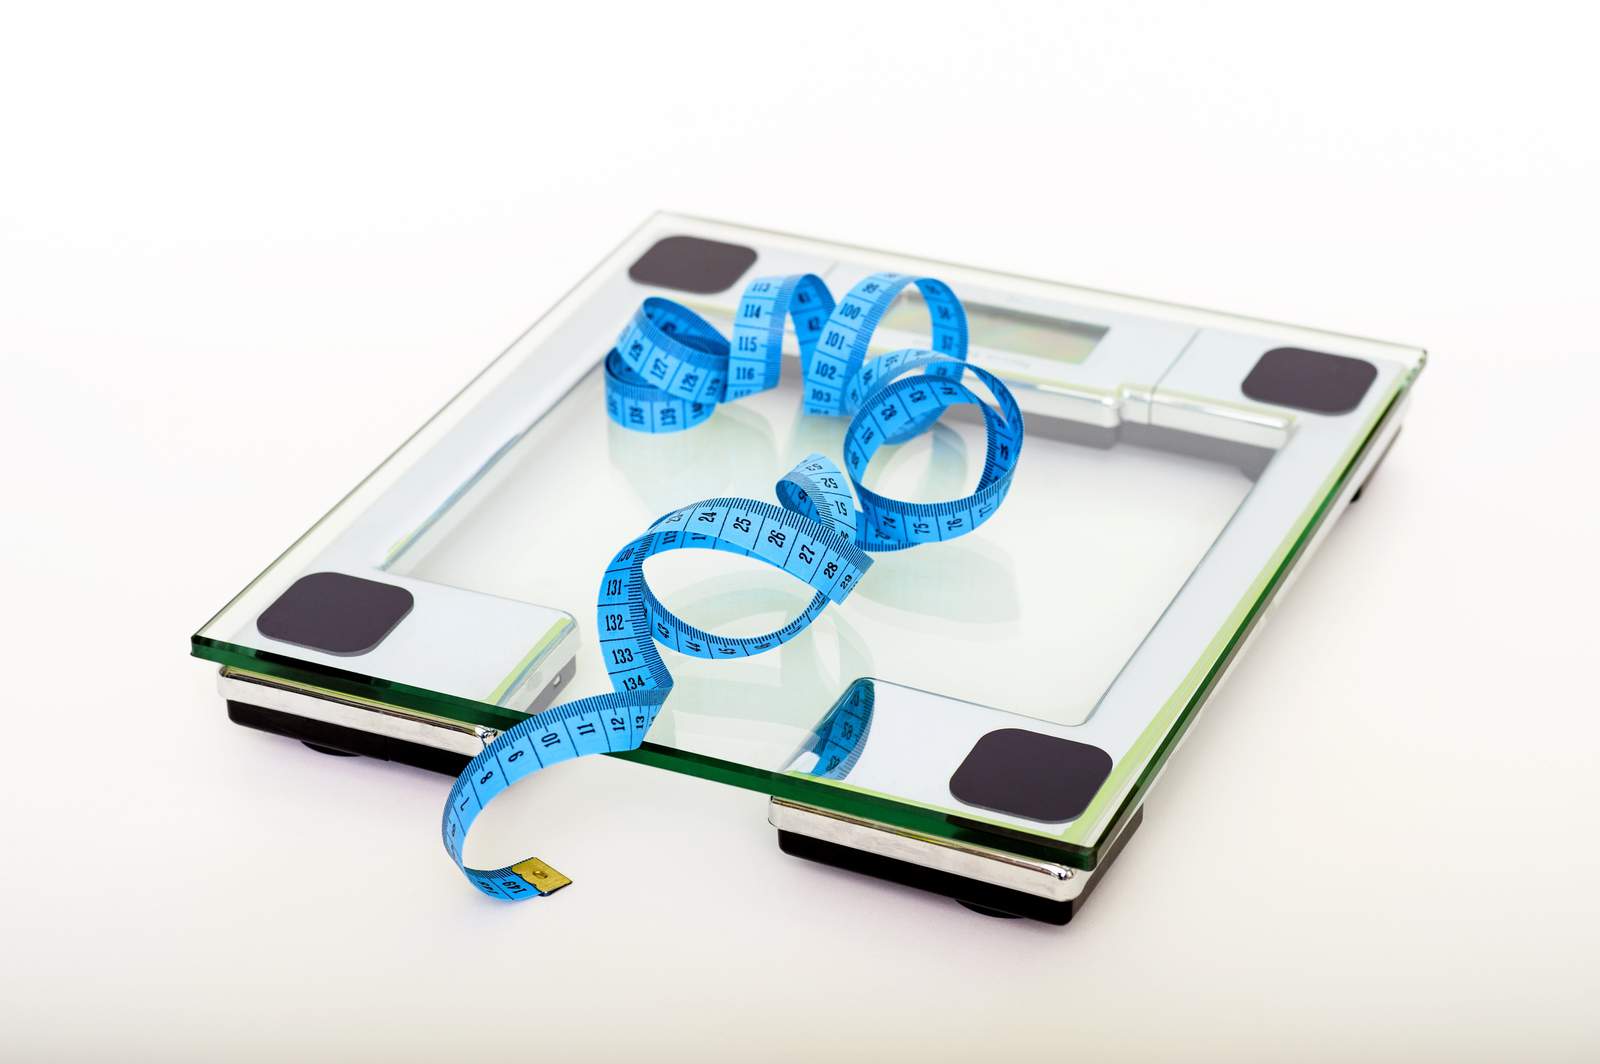 5 important ways to maintain a healthy weight